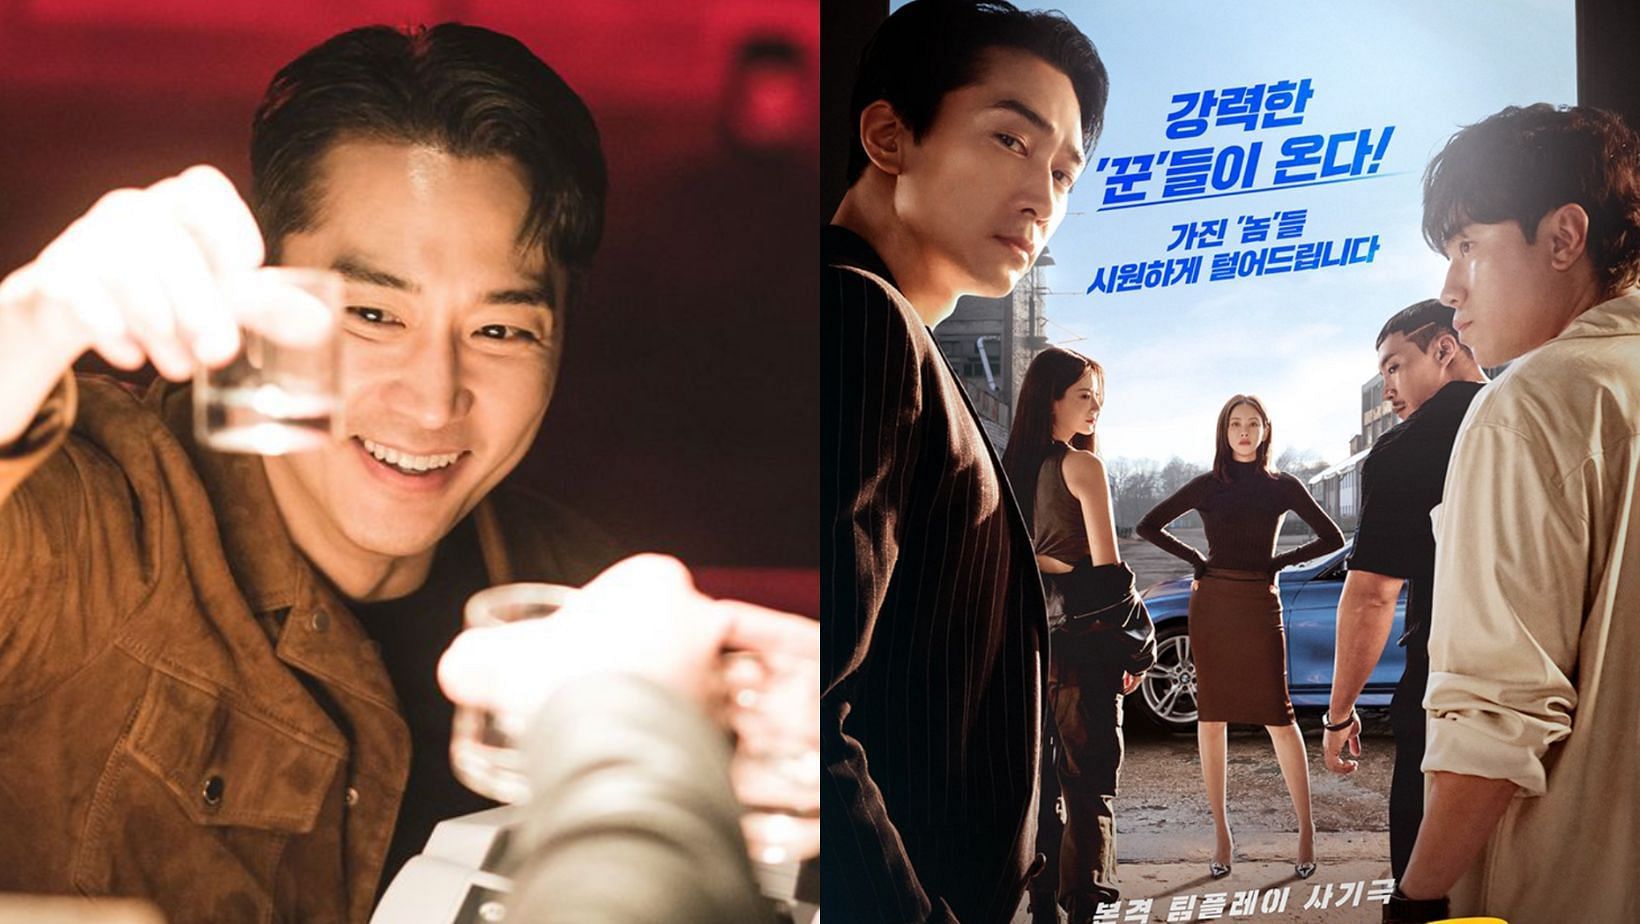 The Player 2: Master of Swindlers &mdash; Release date, plot &amp; all you need to know. (Images via Instagram/@tvn_drama)